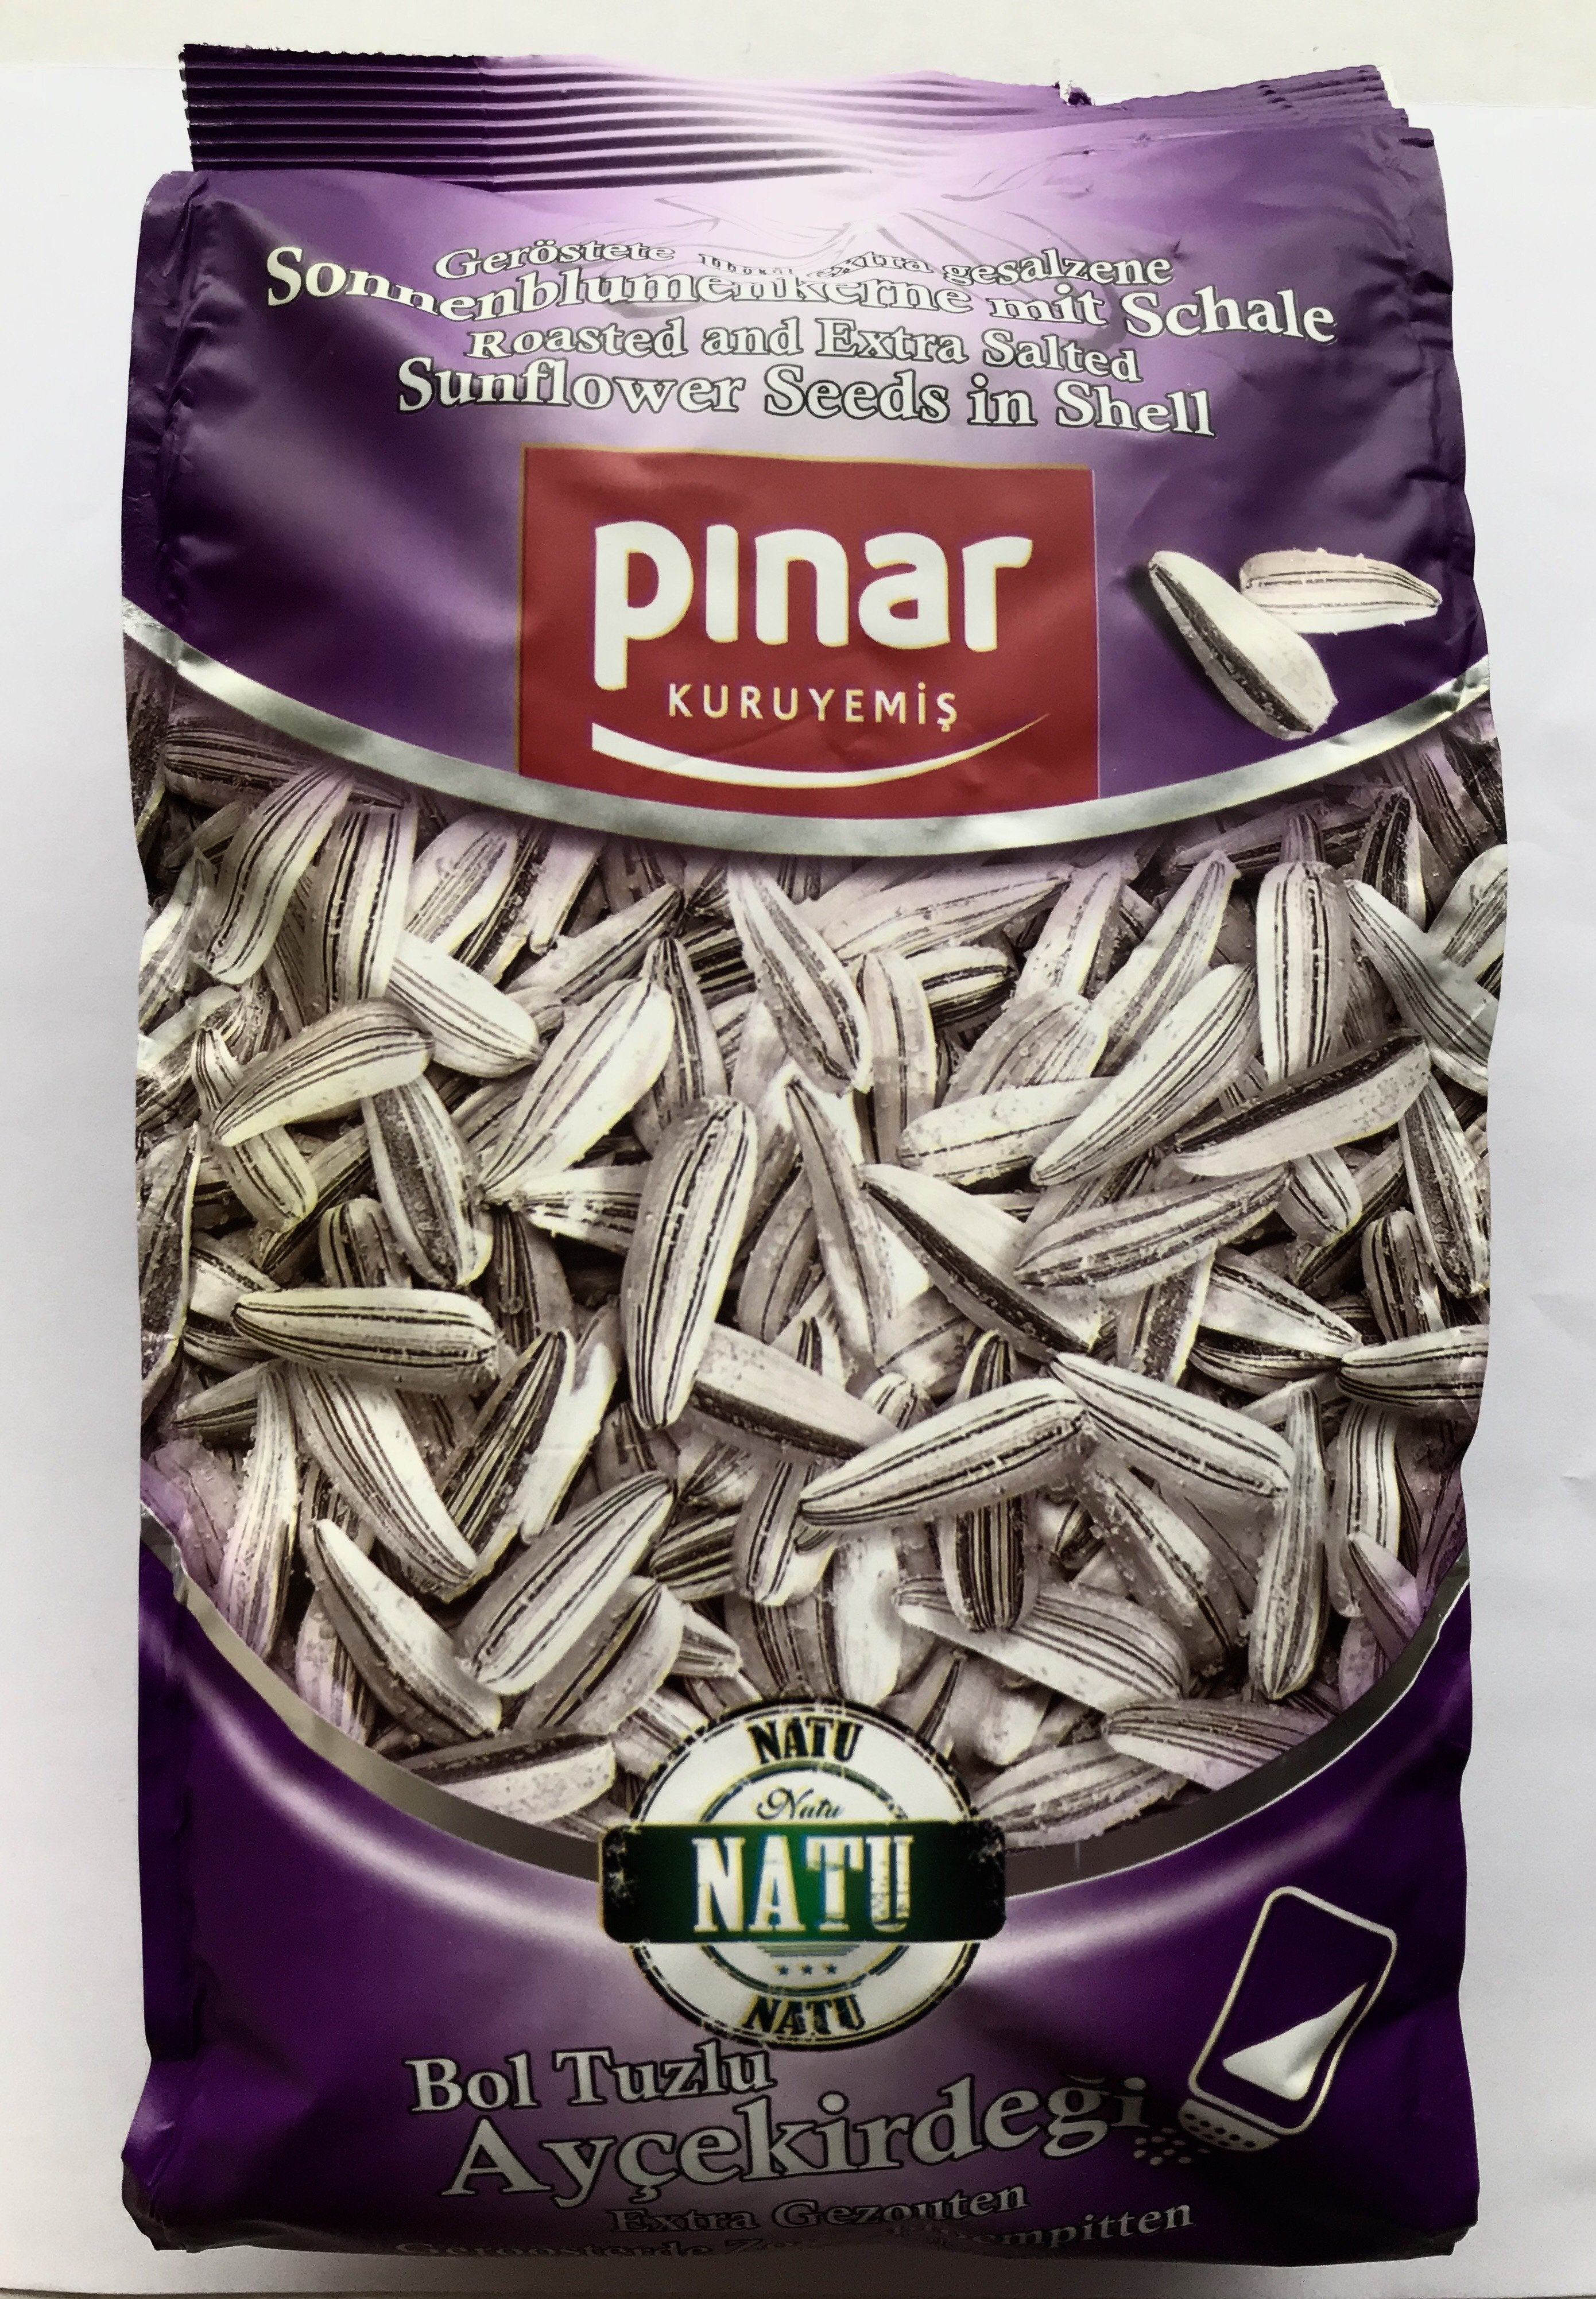 Pinar Roasted and Extra Salted Seeds- 300gr - Turkish Mart 